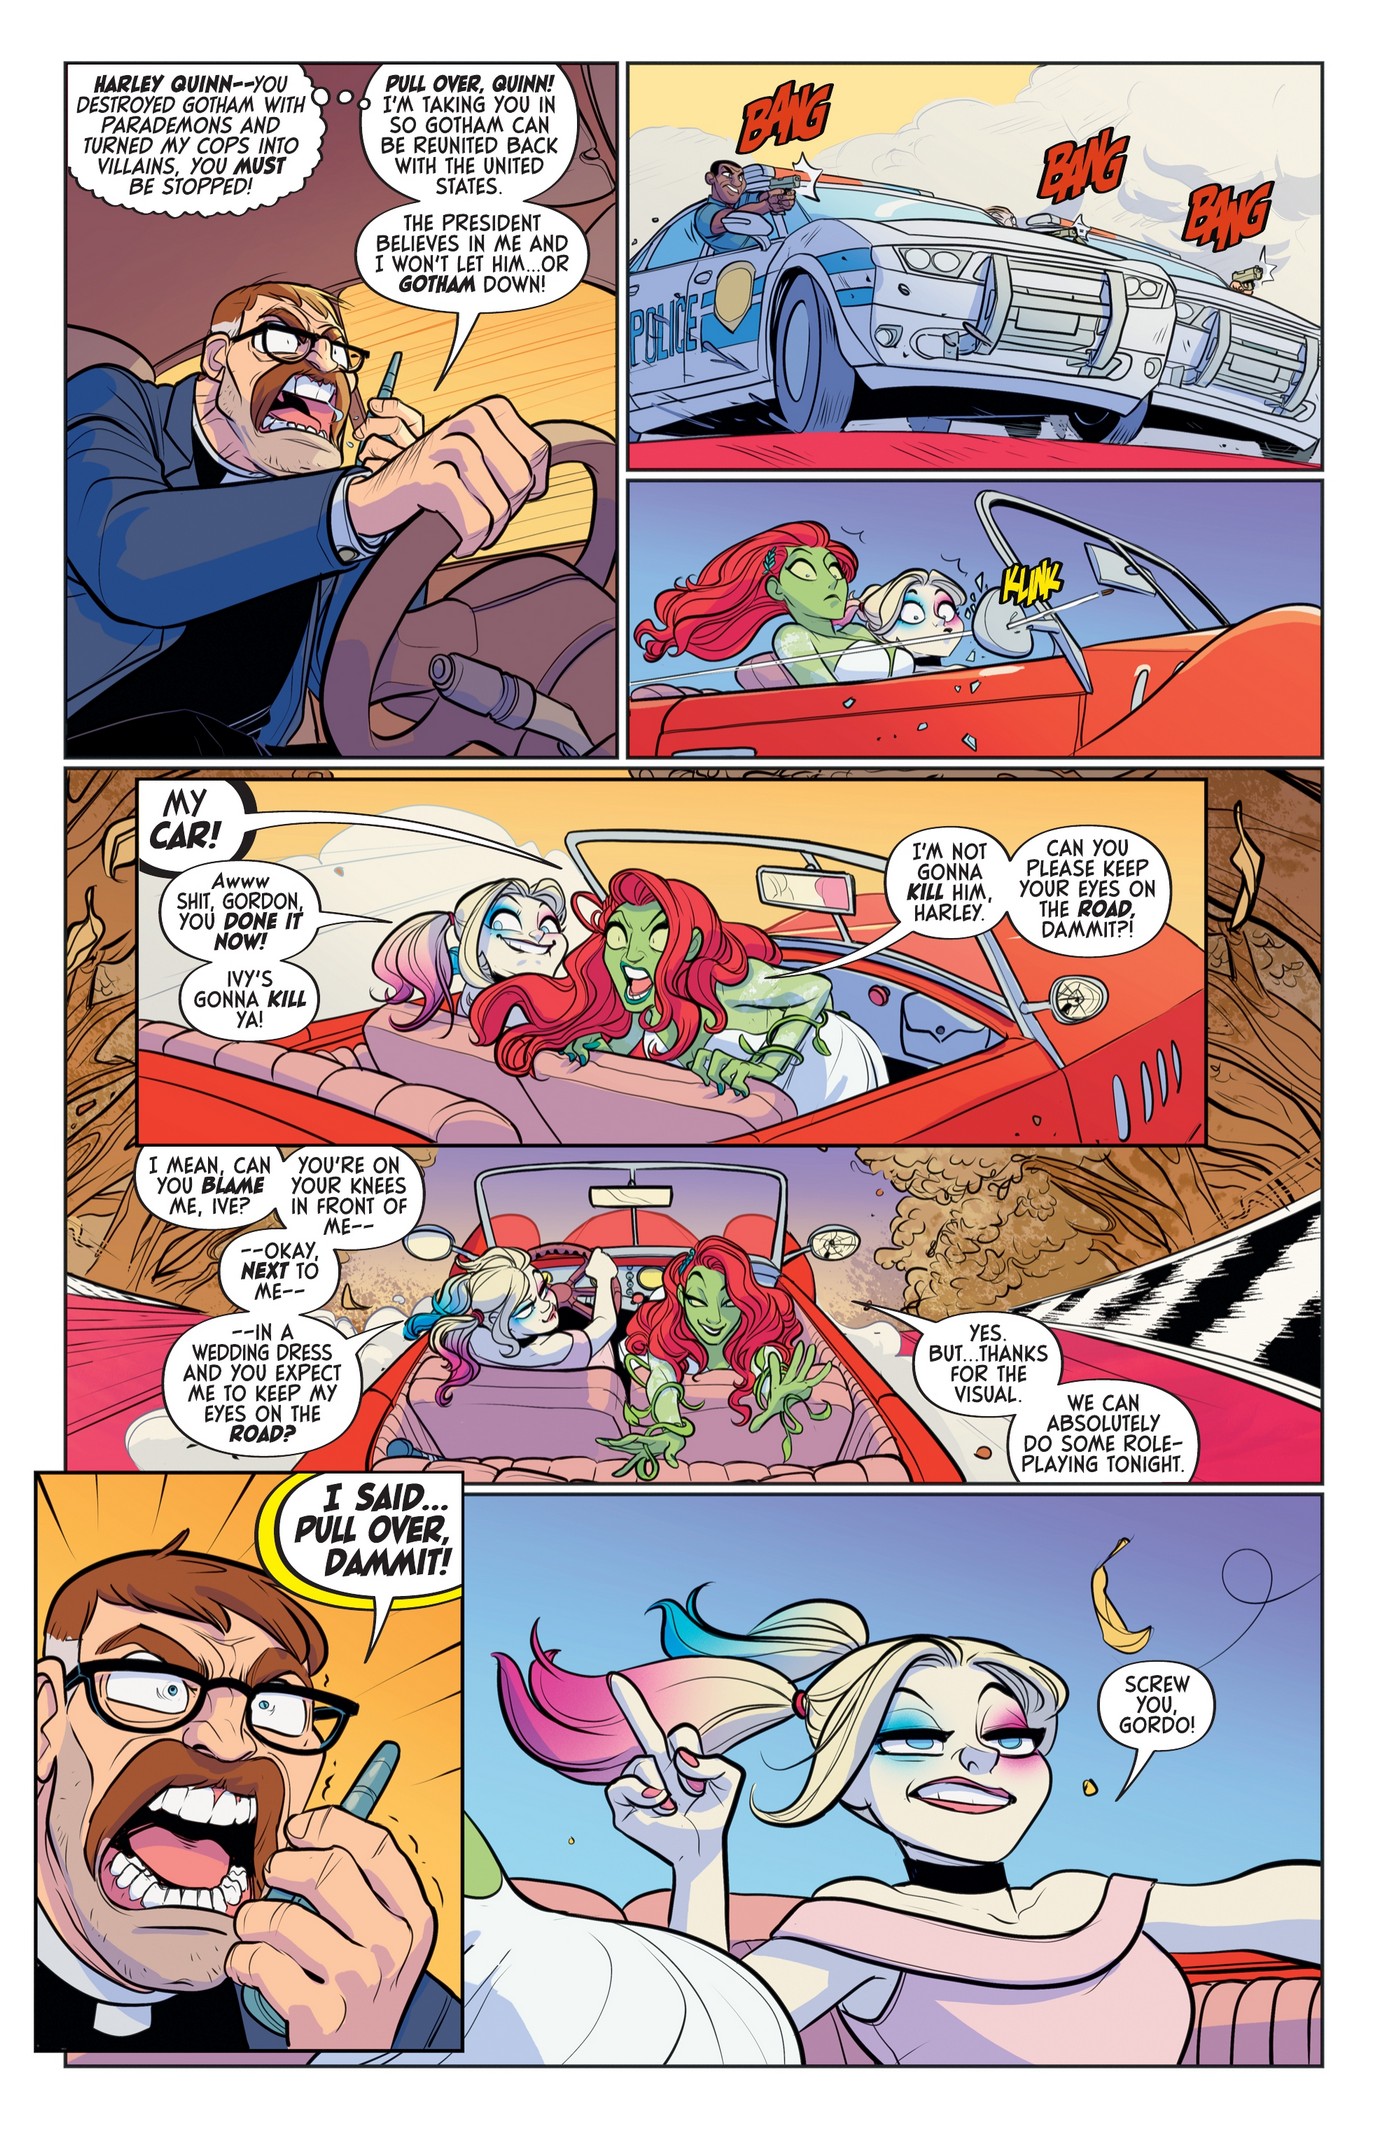 Harley Quinn: The Animated Series: The Eat. Bang! Kill. Tour (2021-): Chapter 1 - Page 4